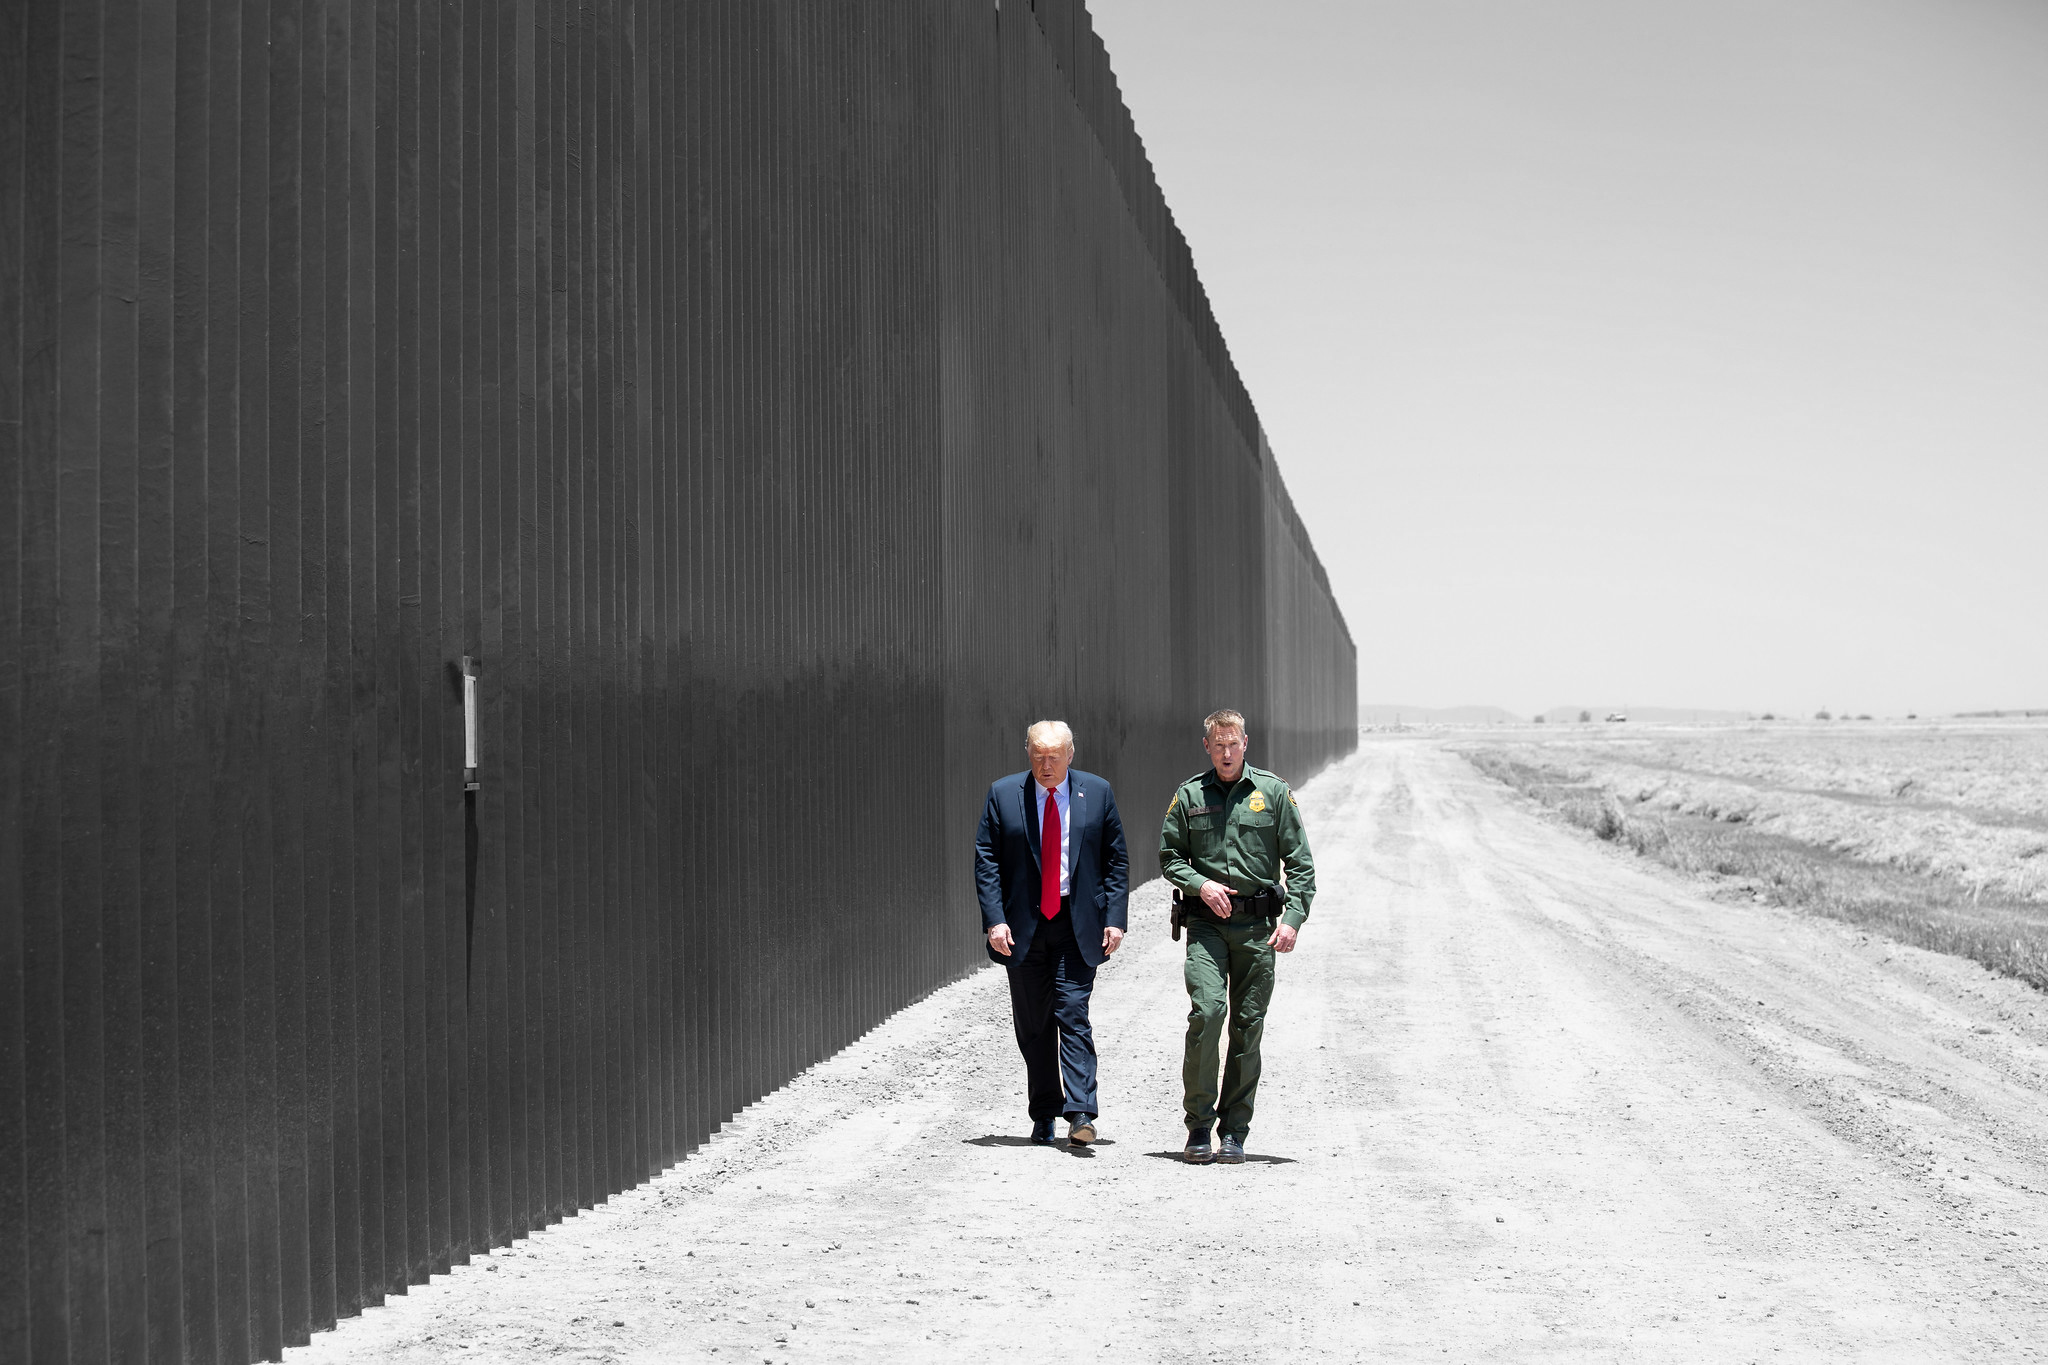 FLASHBACK: When Democrats Supported Sane Border Policies